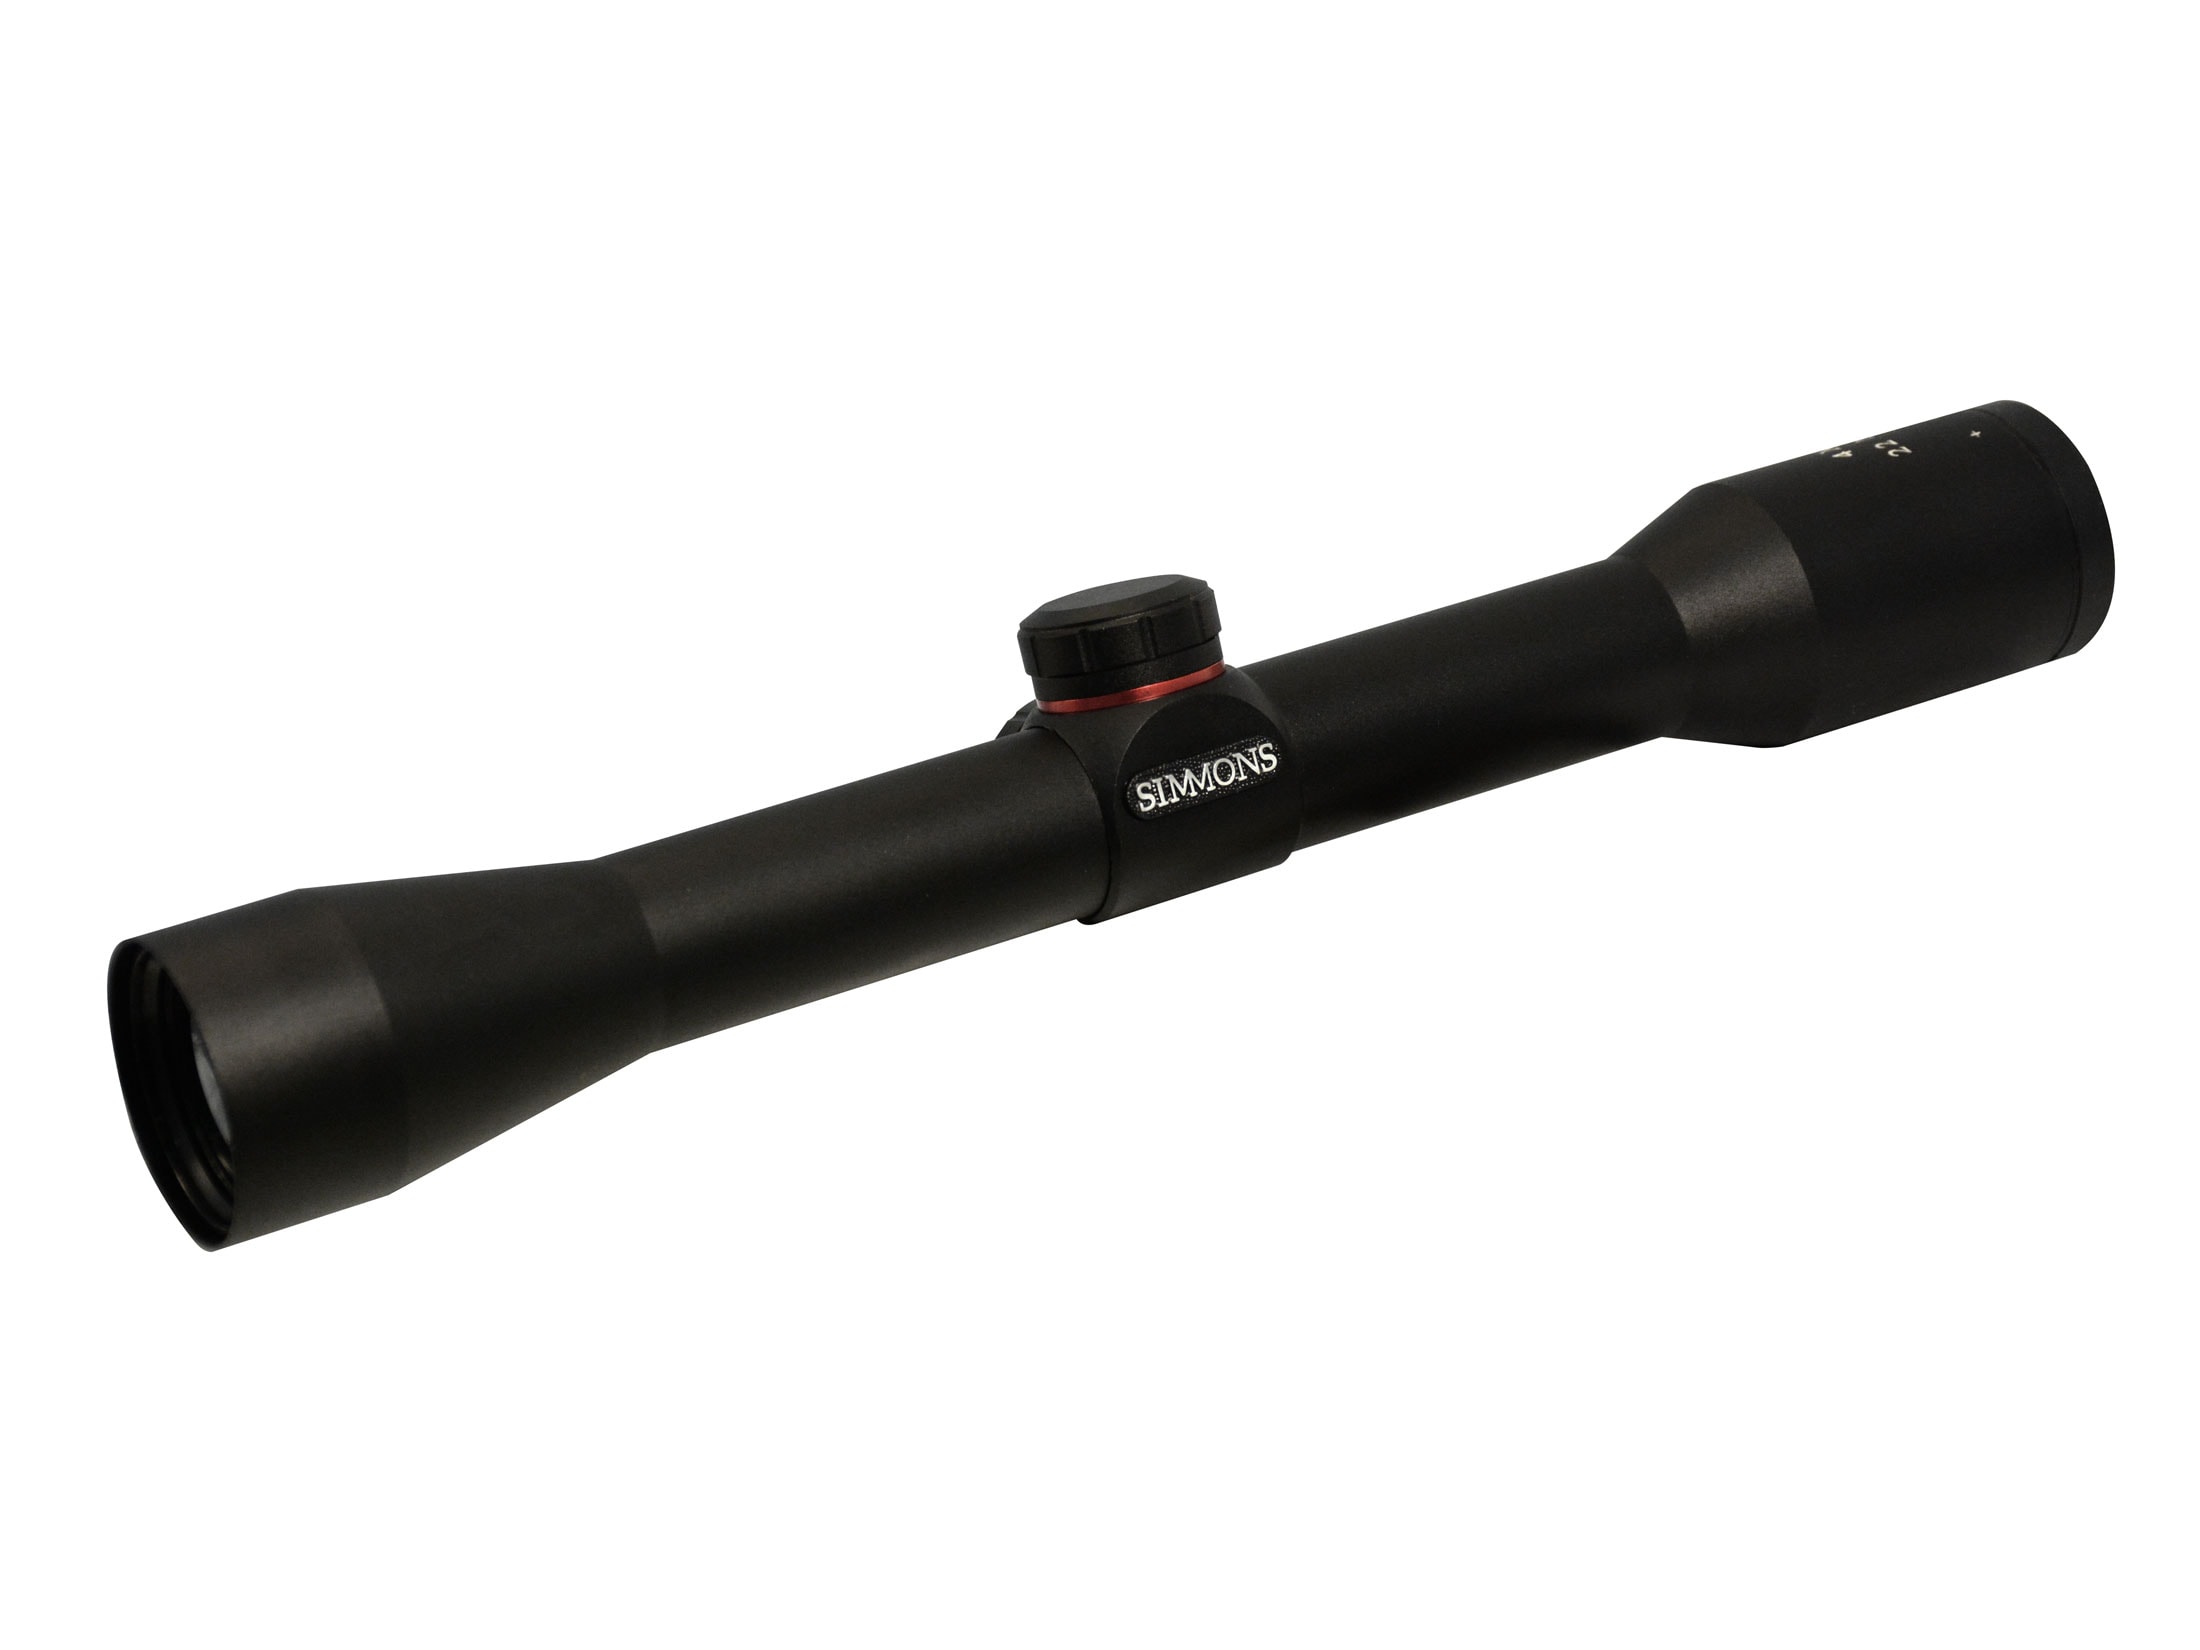 Simmons 22 Mag Rimfire Rifle Scope 4x 32mm Truplex Reticle with Rings